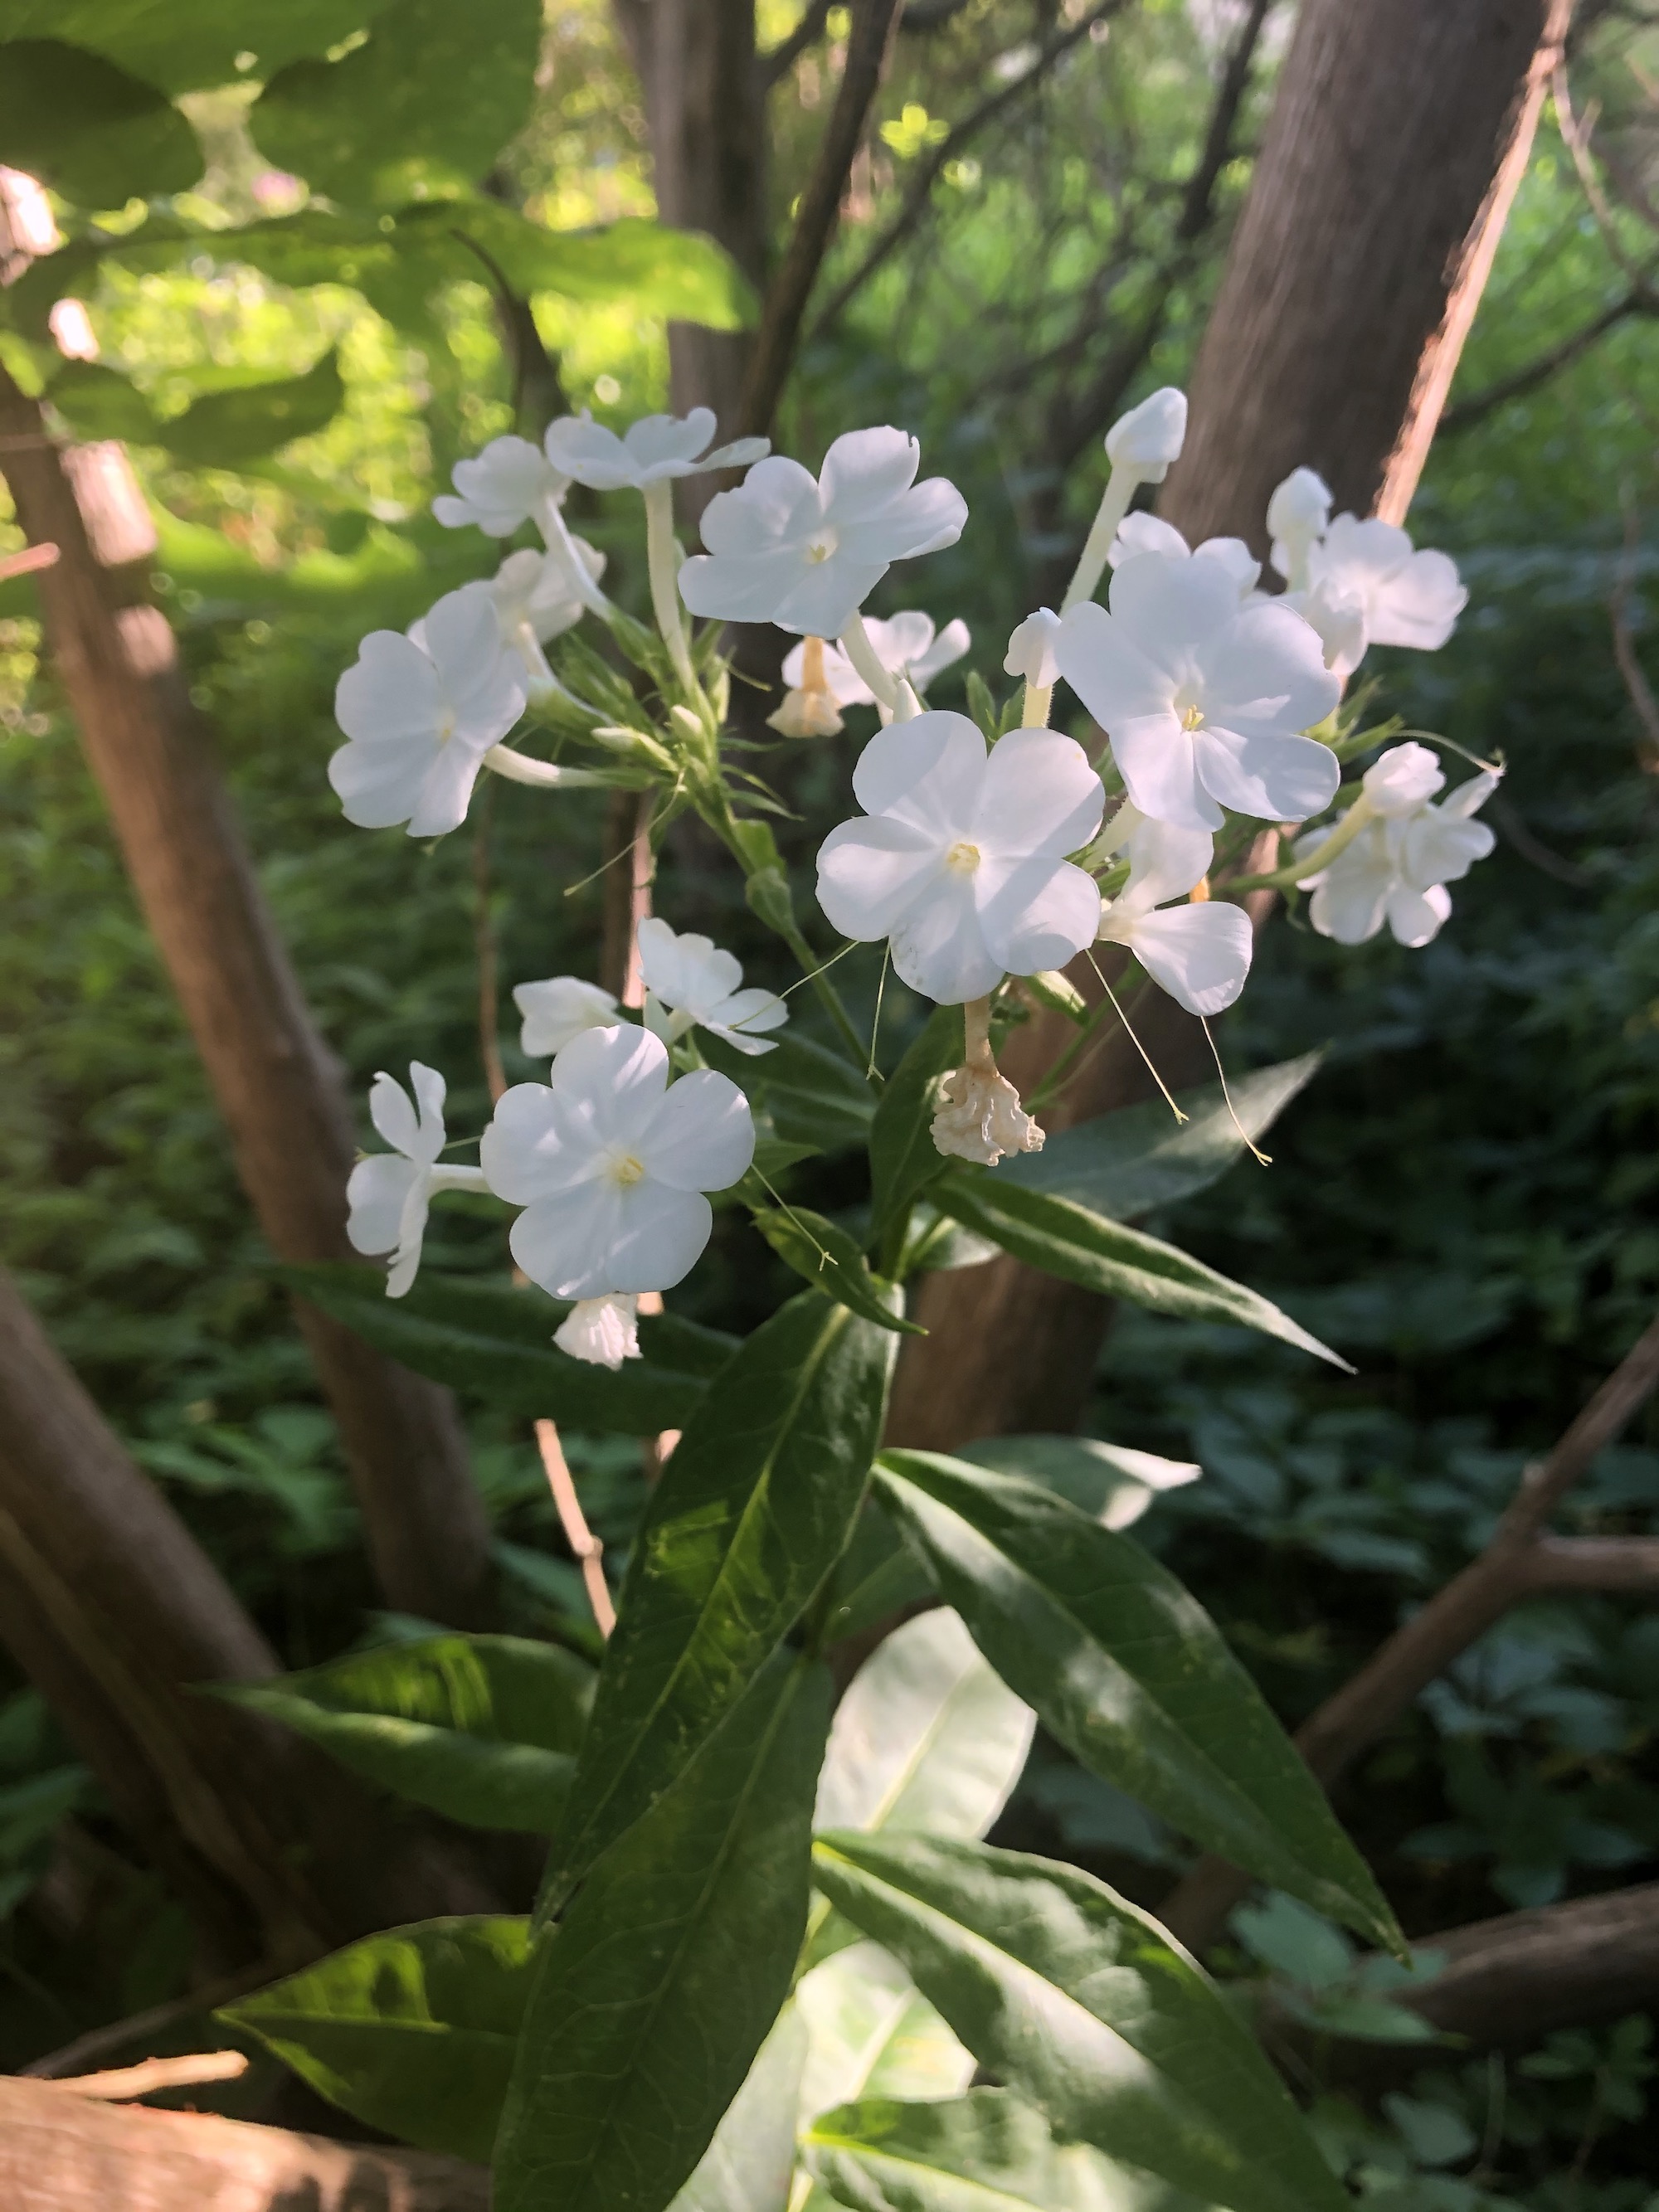 Tall Garden Phlox by Duck Pond on July 4, 2020.